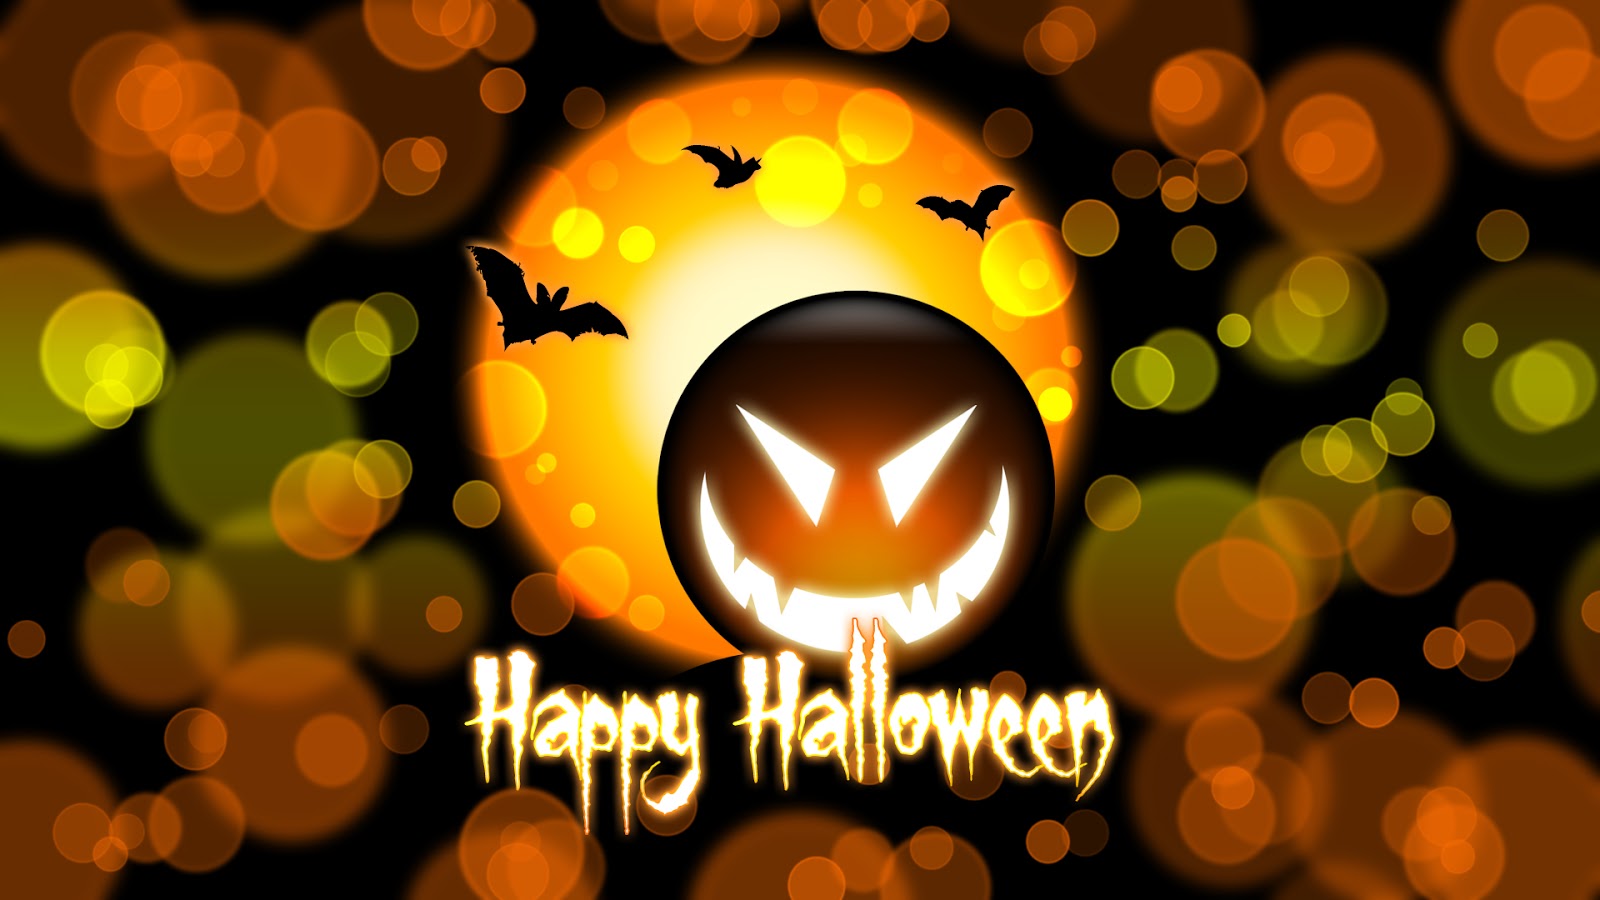 Happy Halloween wishescards animations greetings emotions